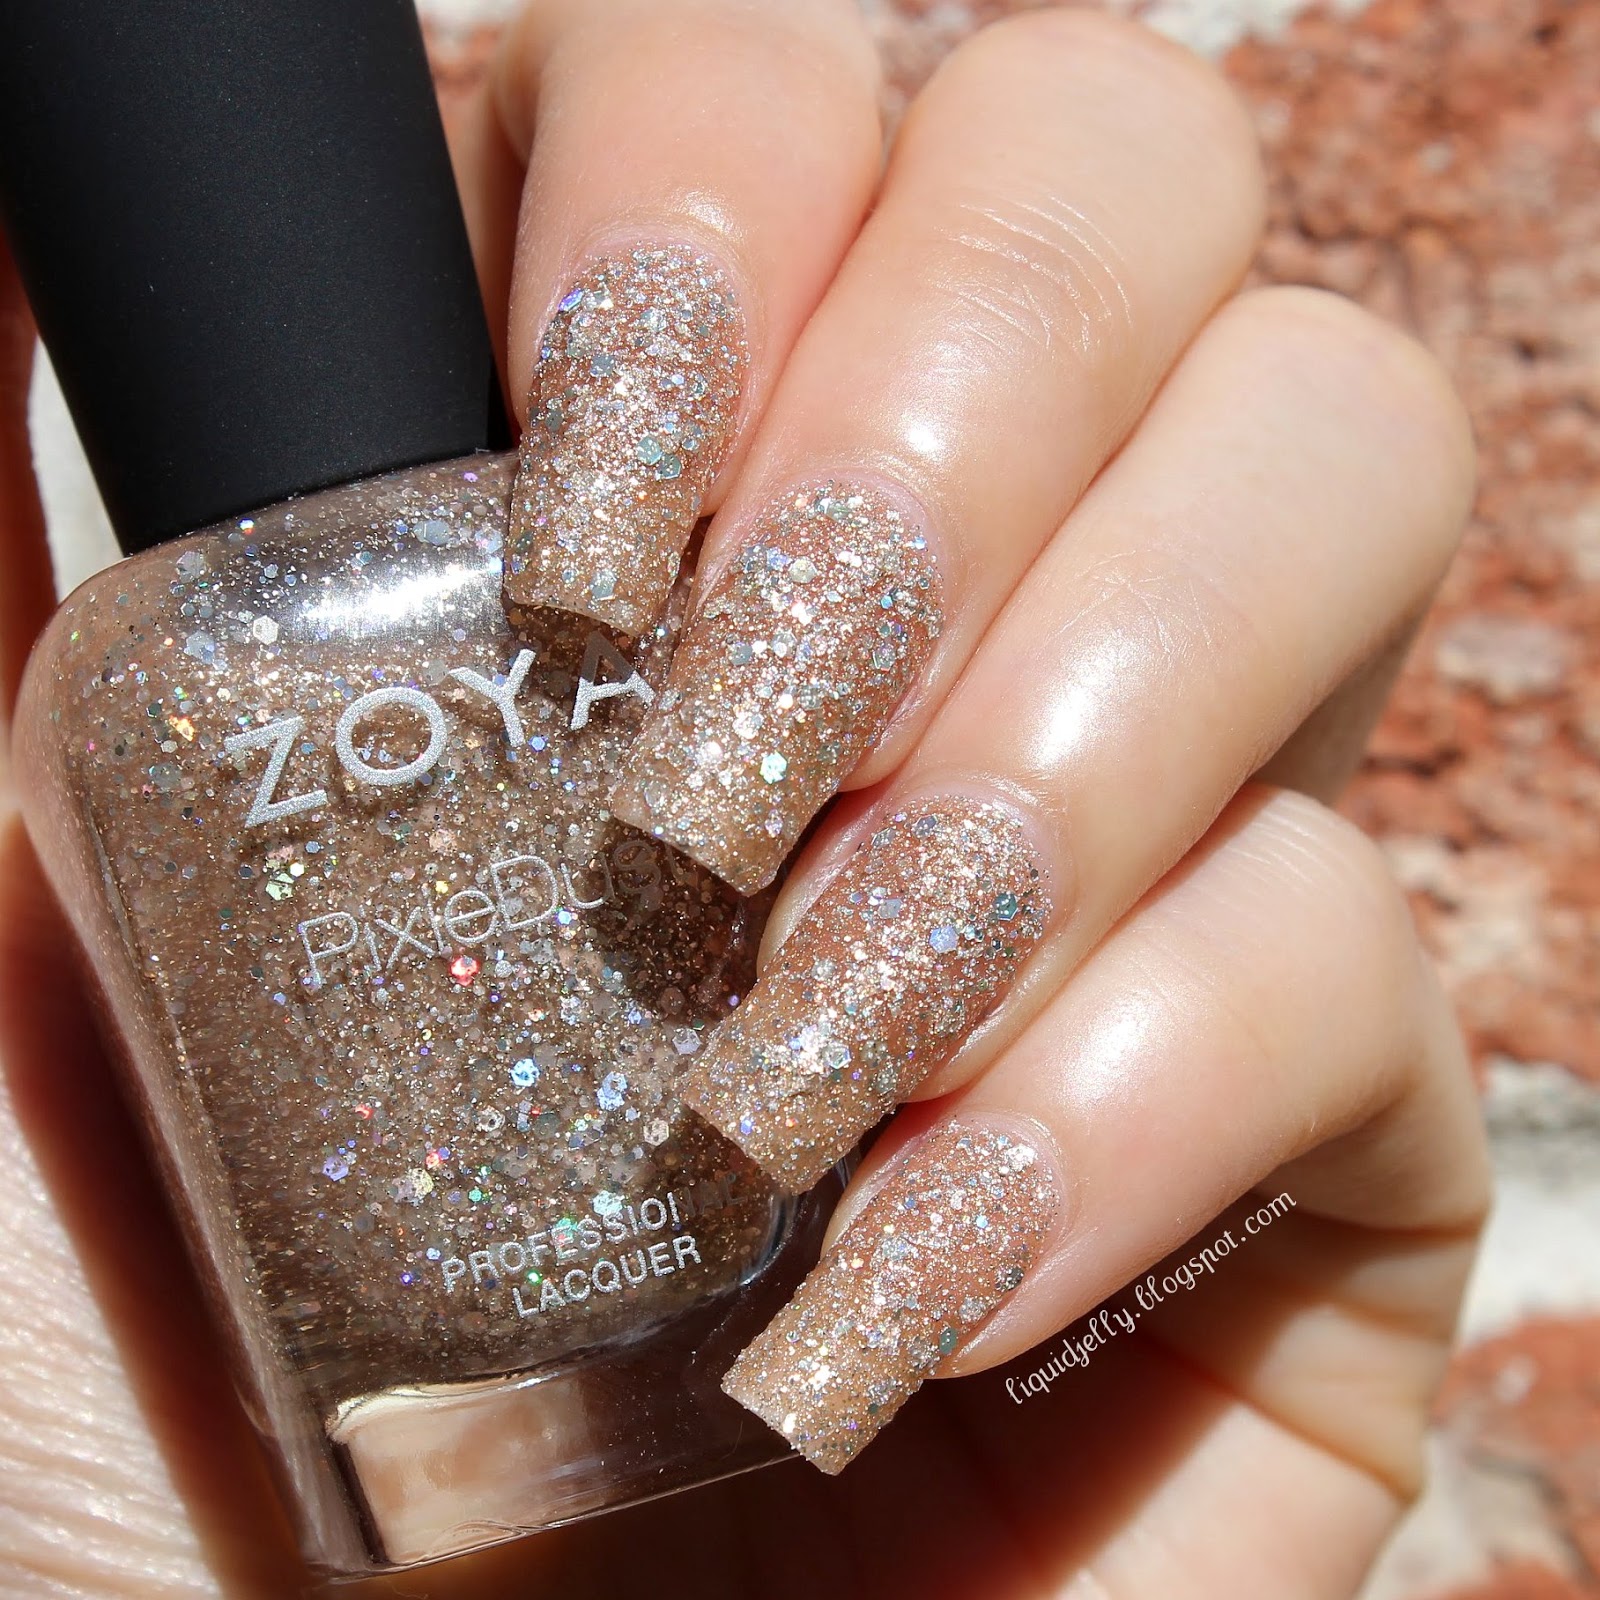 Liquid Jelly: [Review + Swatch] Zoya Magical Pixie - Summer 2014